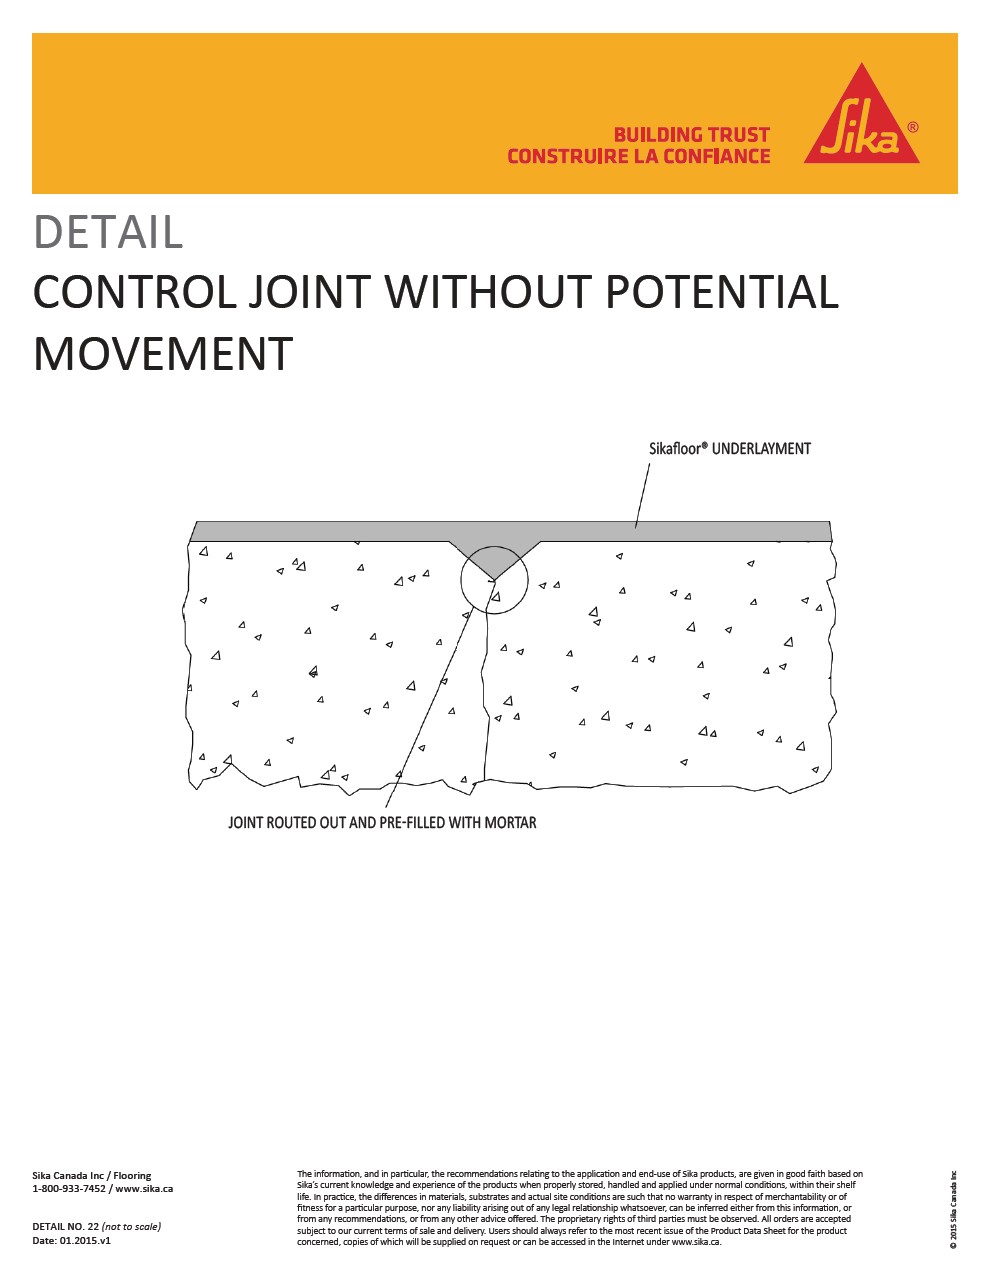  22-Control Joint without Potential Movement